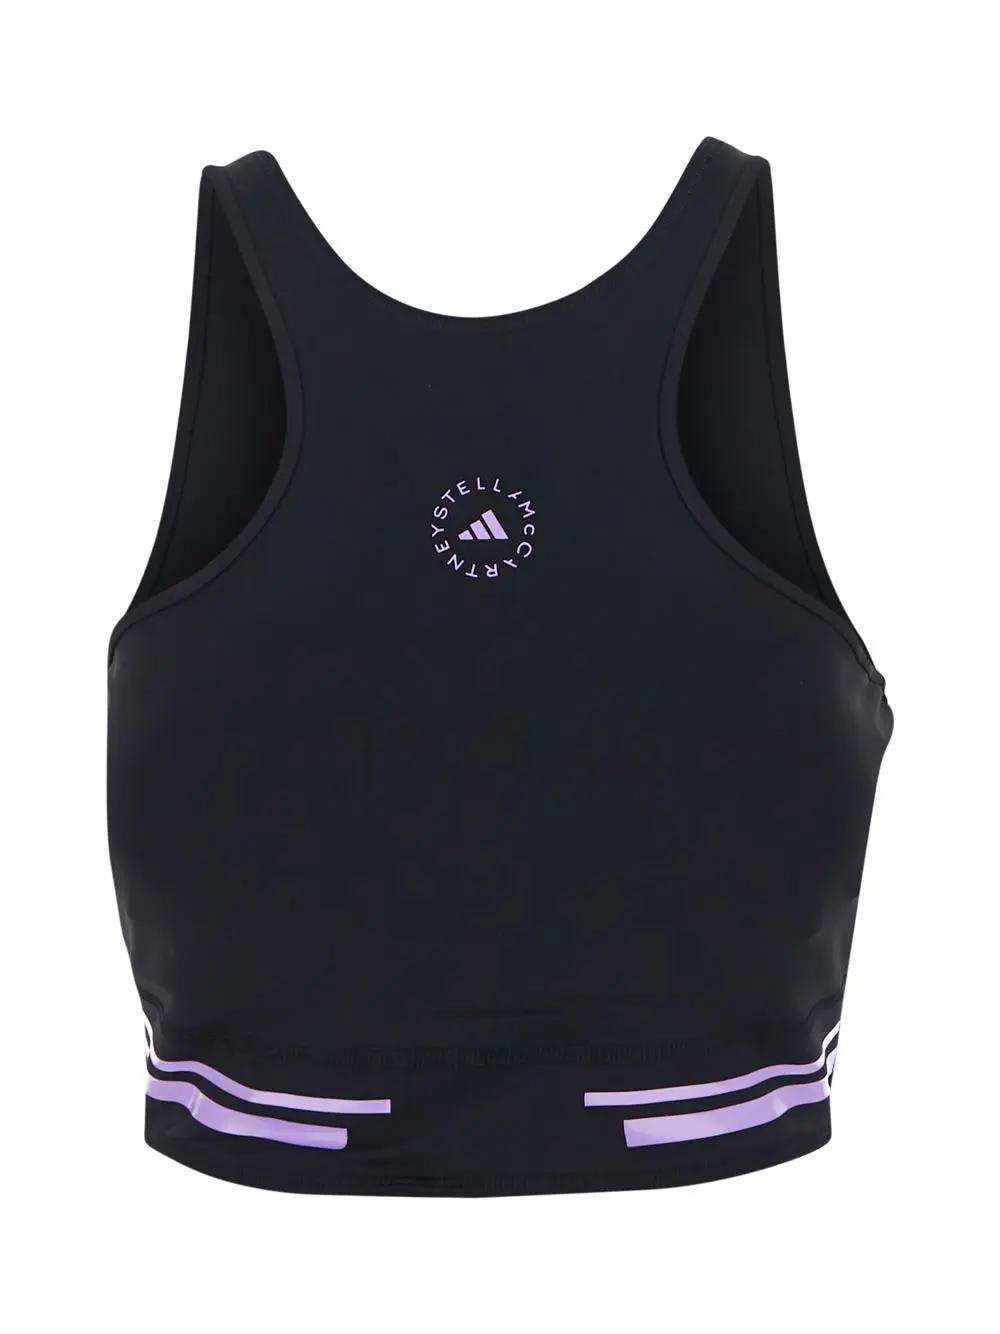 Adidas by Stella McCartney Running Top - female - Size: Extra Small